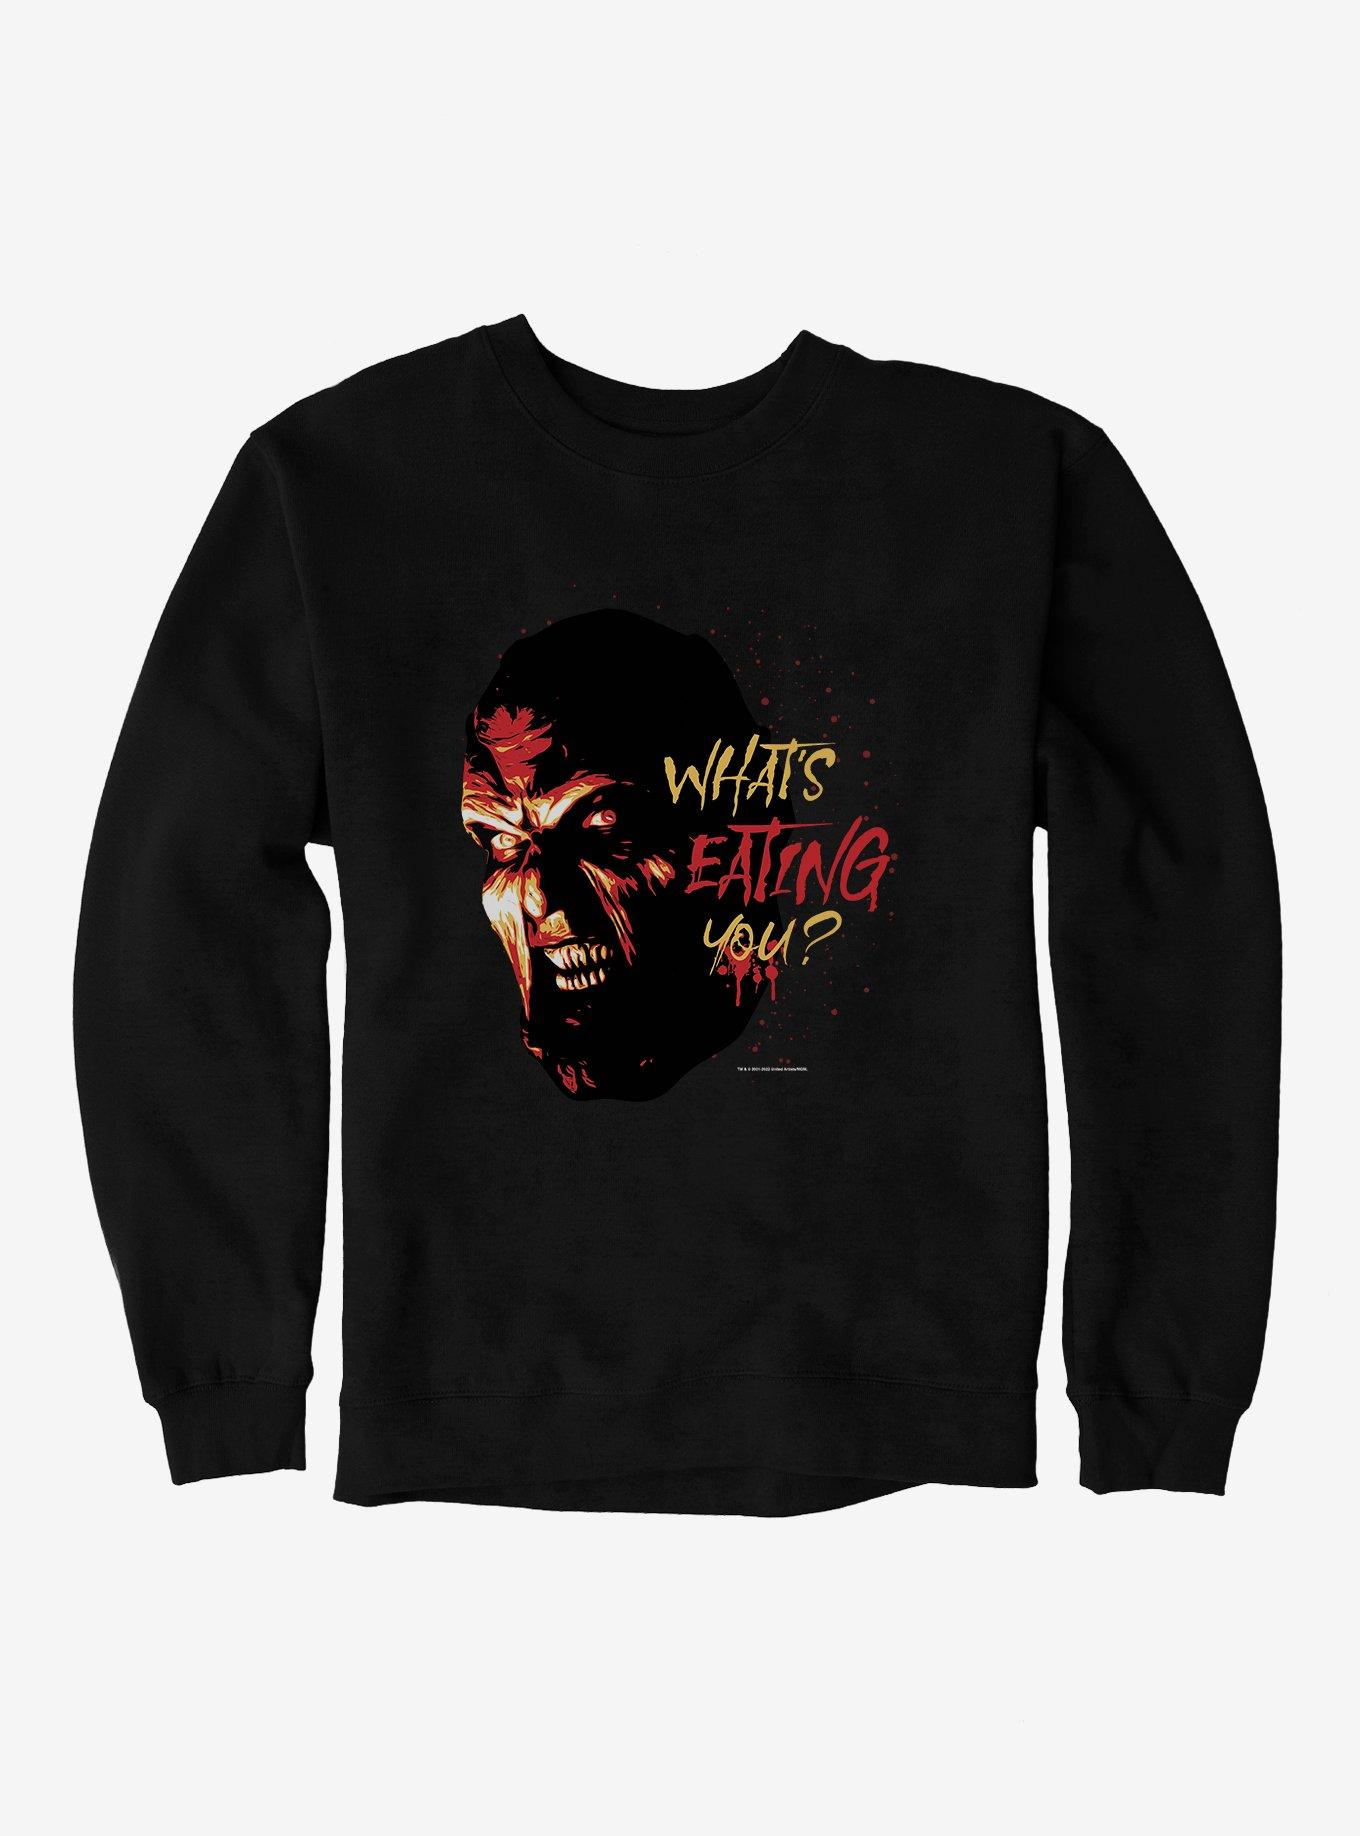 Jeepers Creepers What's Eating You? Sweatshirt, BLACK, hi-res